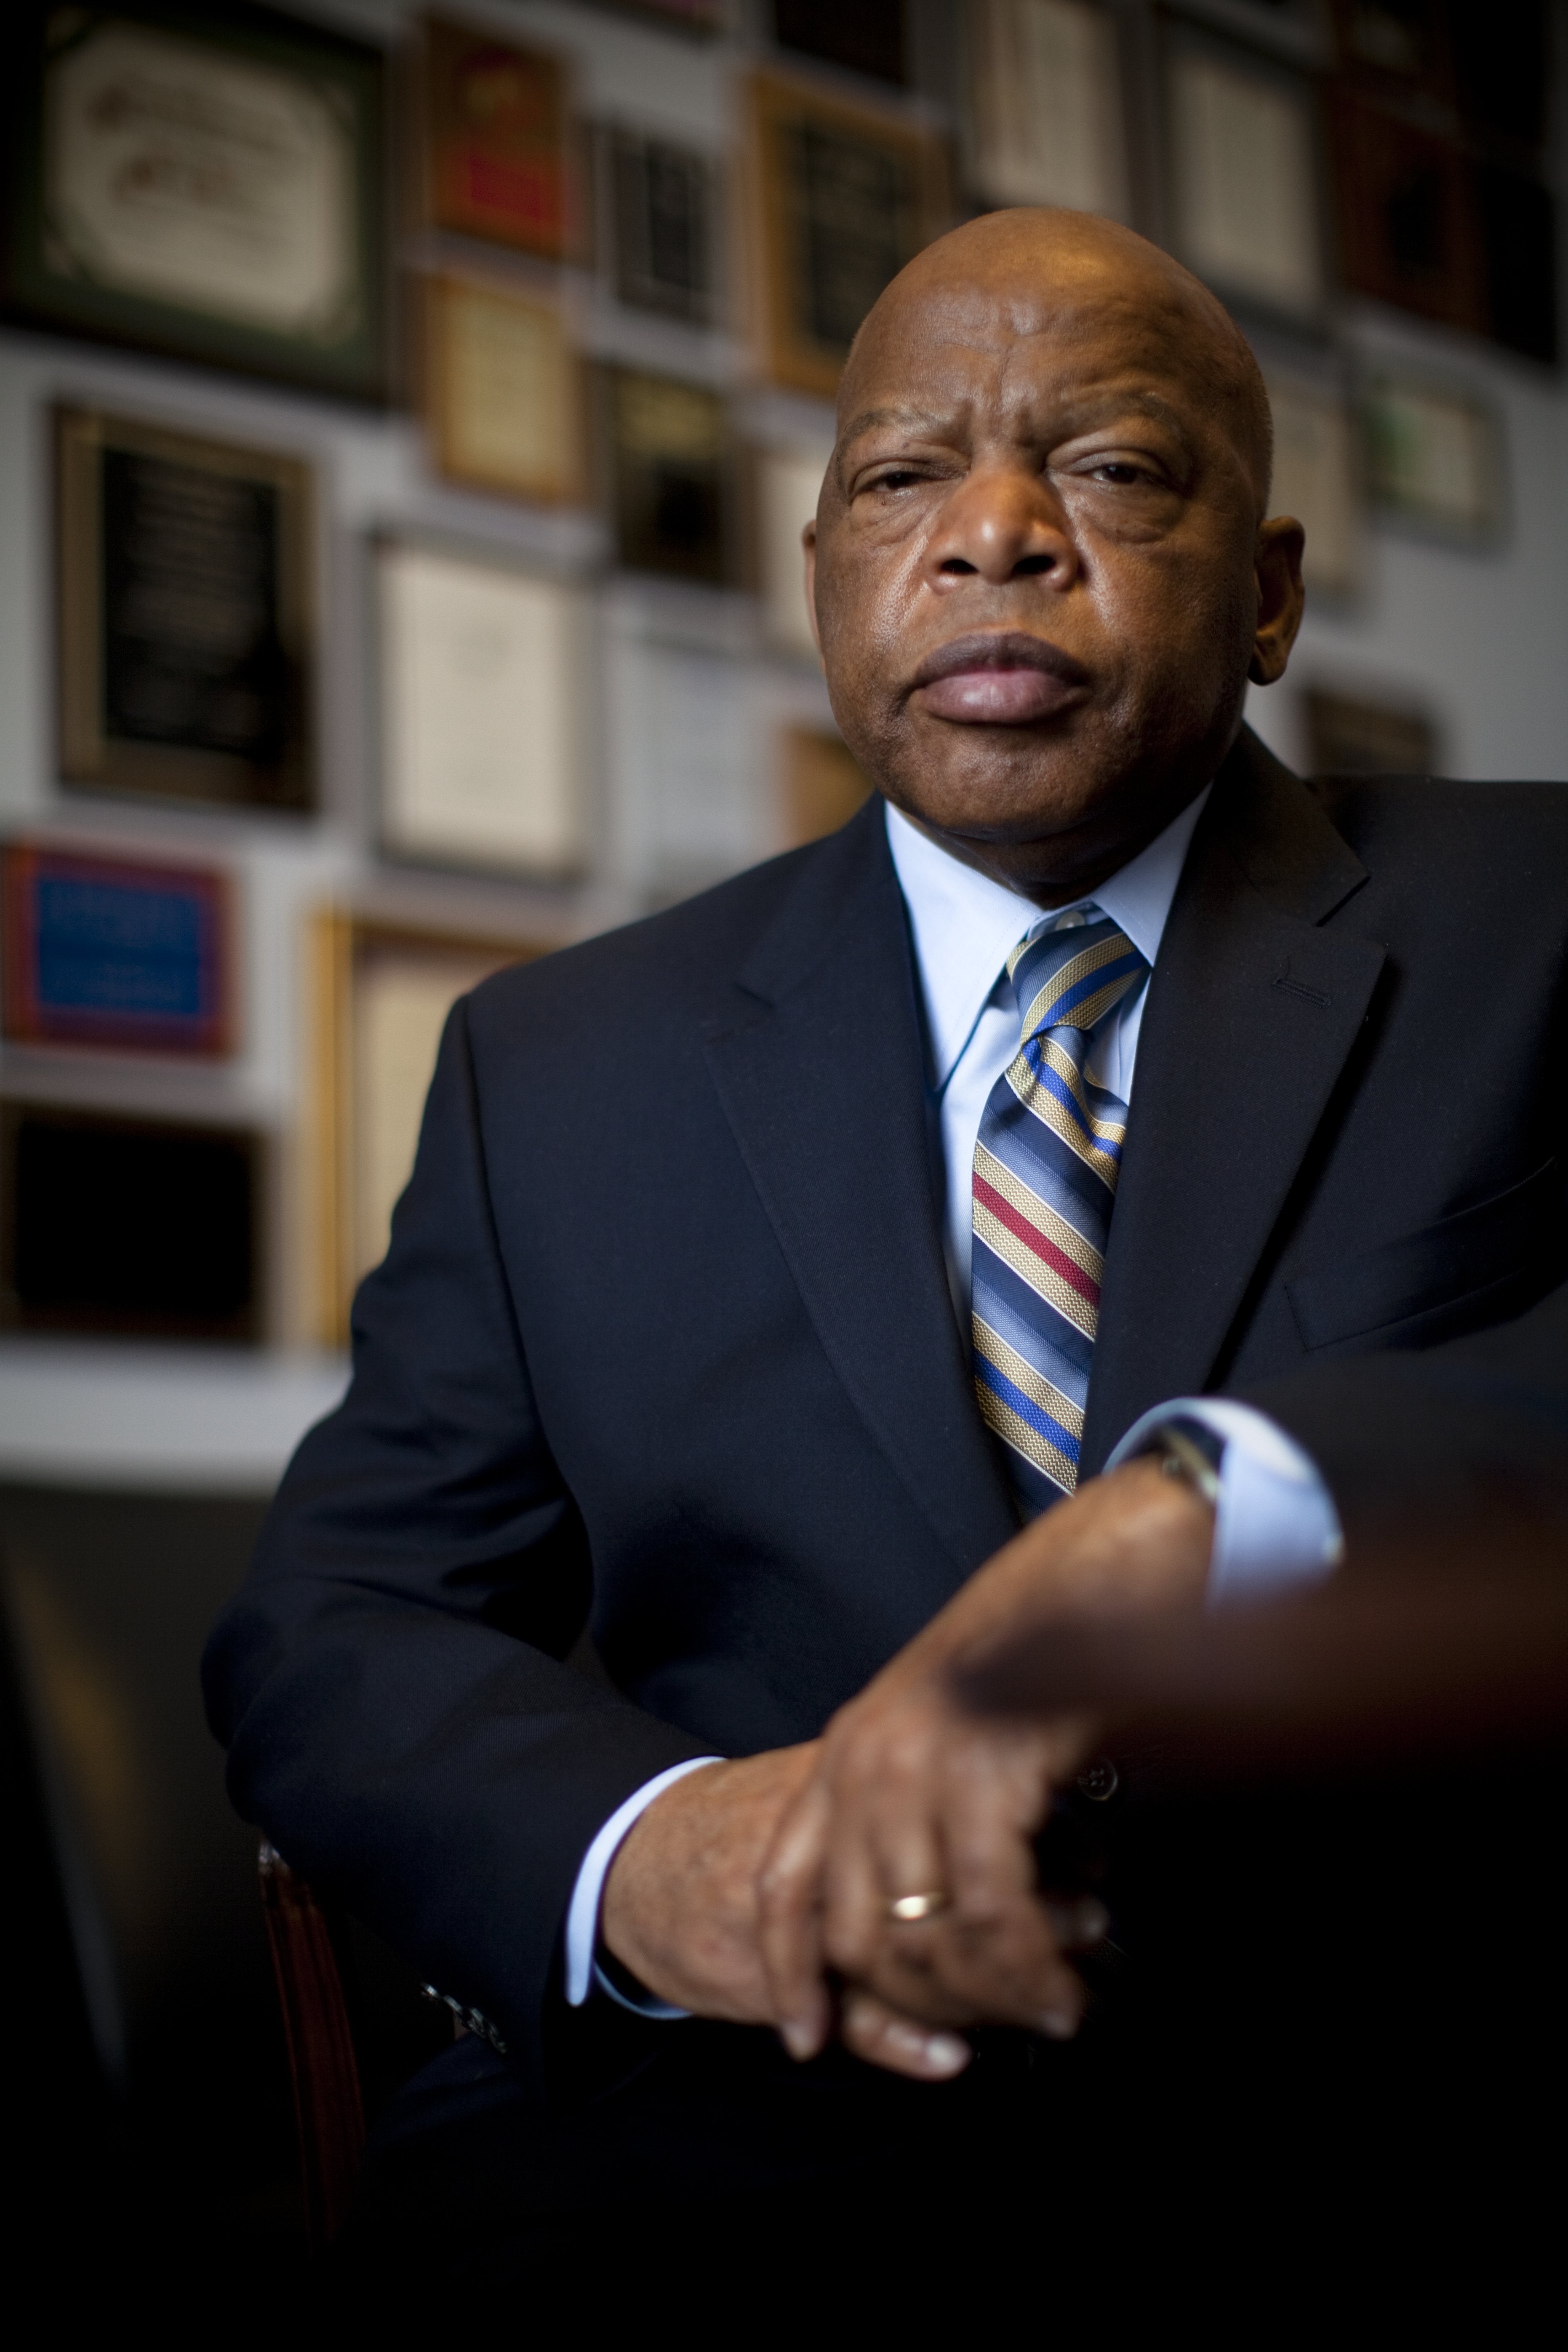 Rejoice! There's A John Lewis Documentary Headed To PBS
